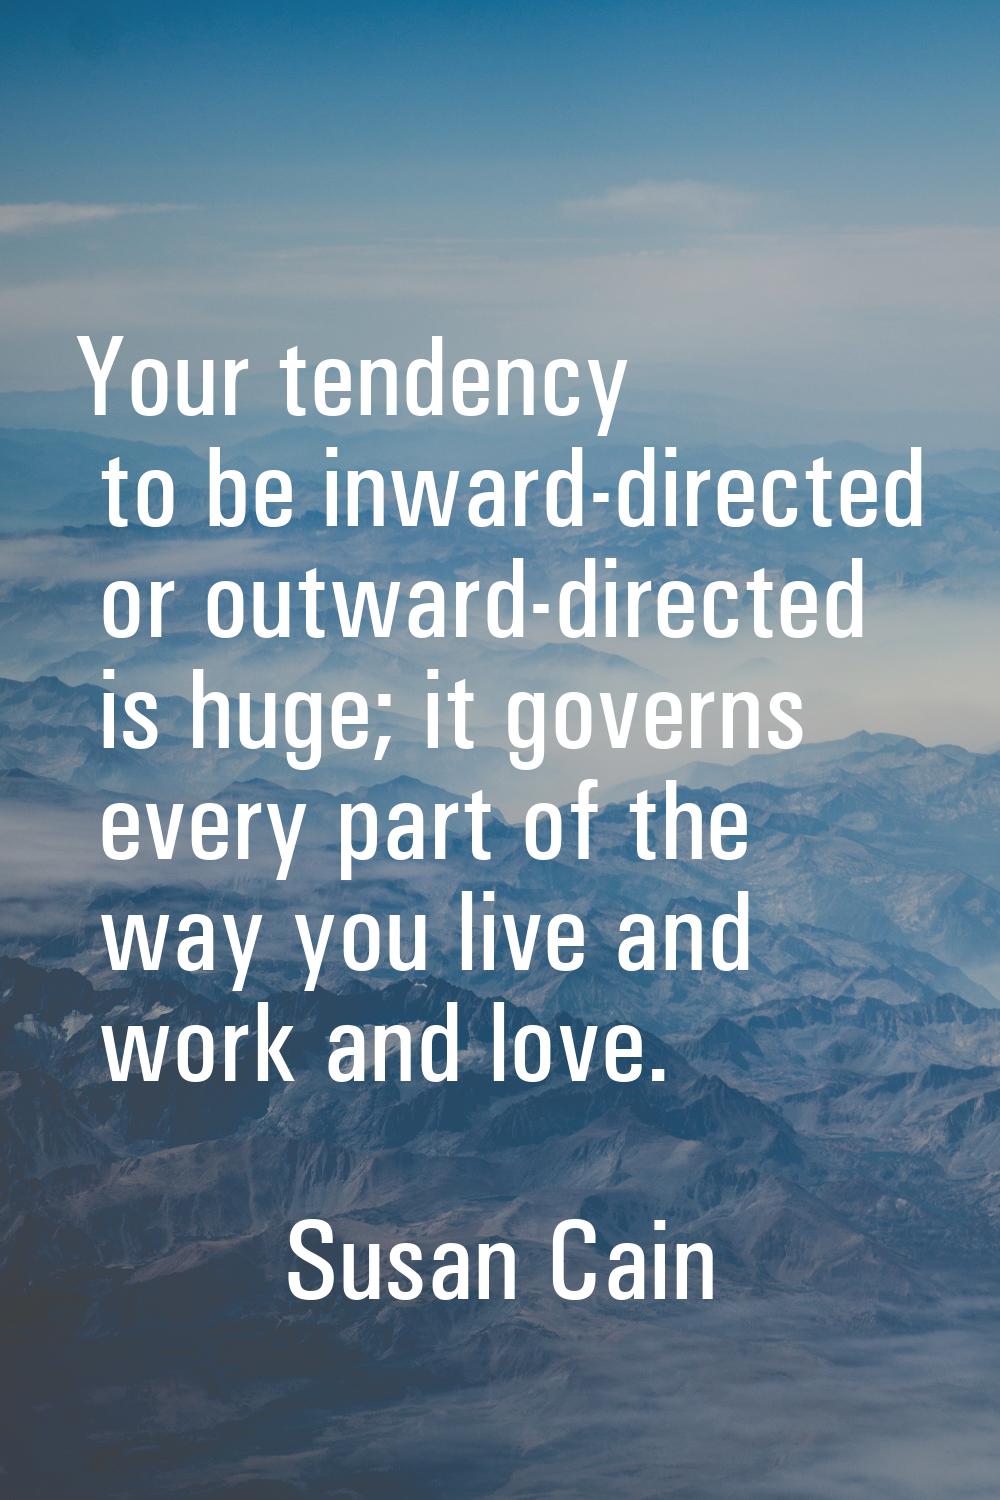 Your tendency to be inward-directed or outward-directed is huge; it governs every part of the way y